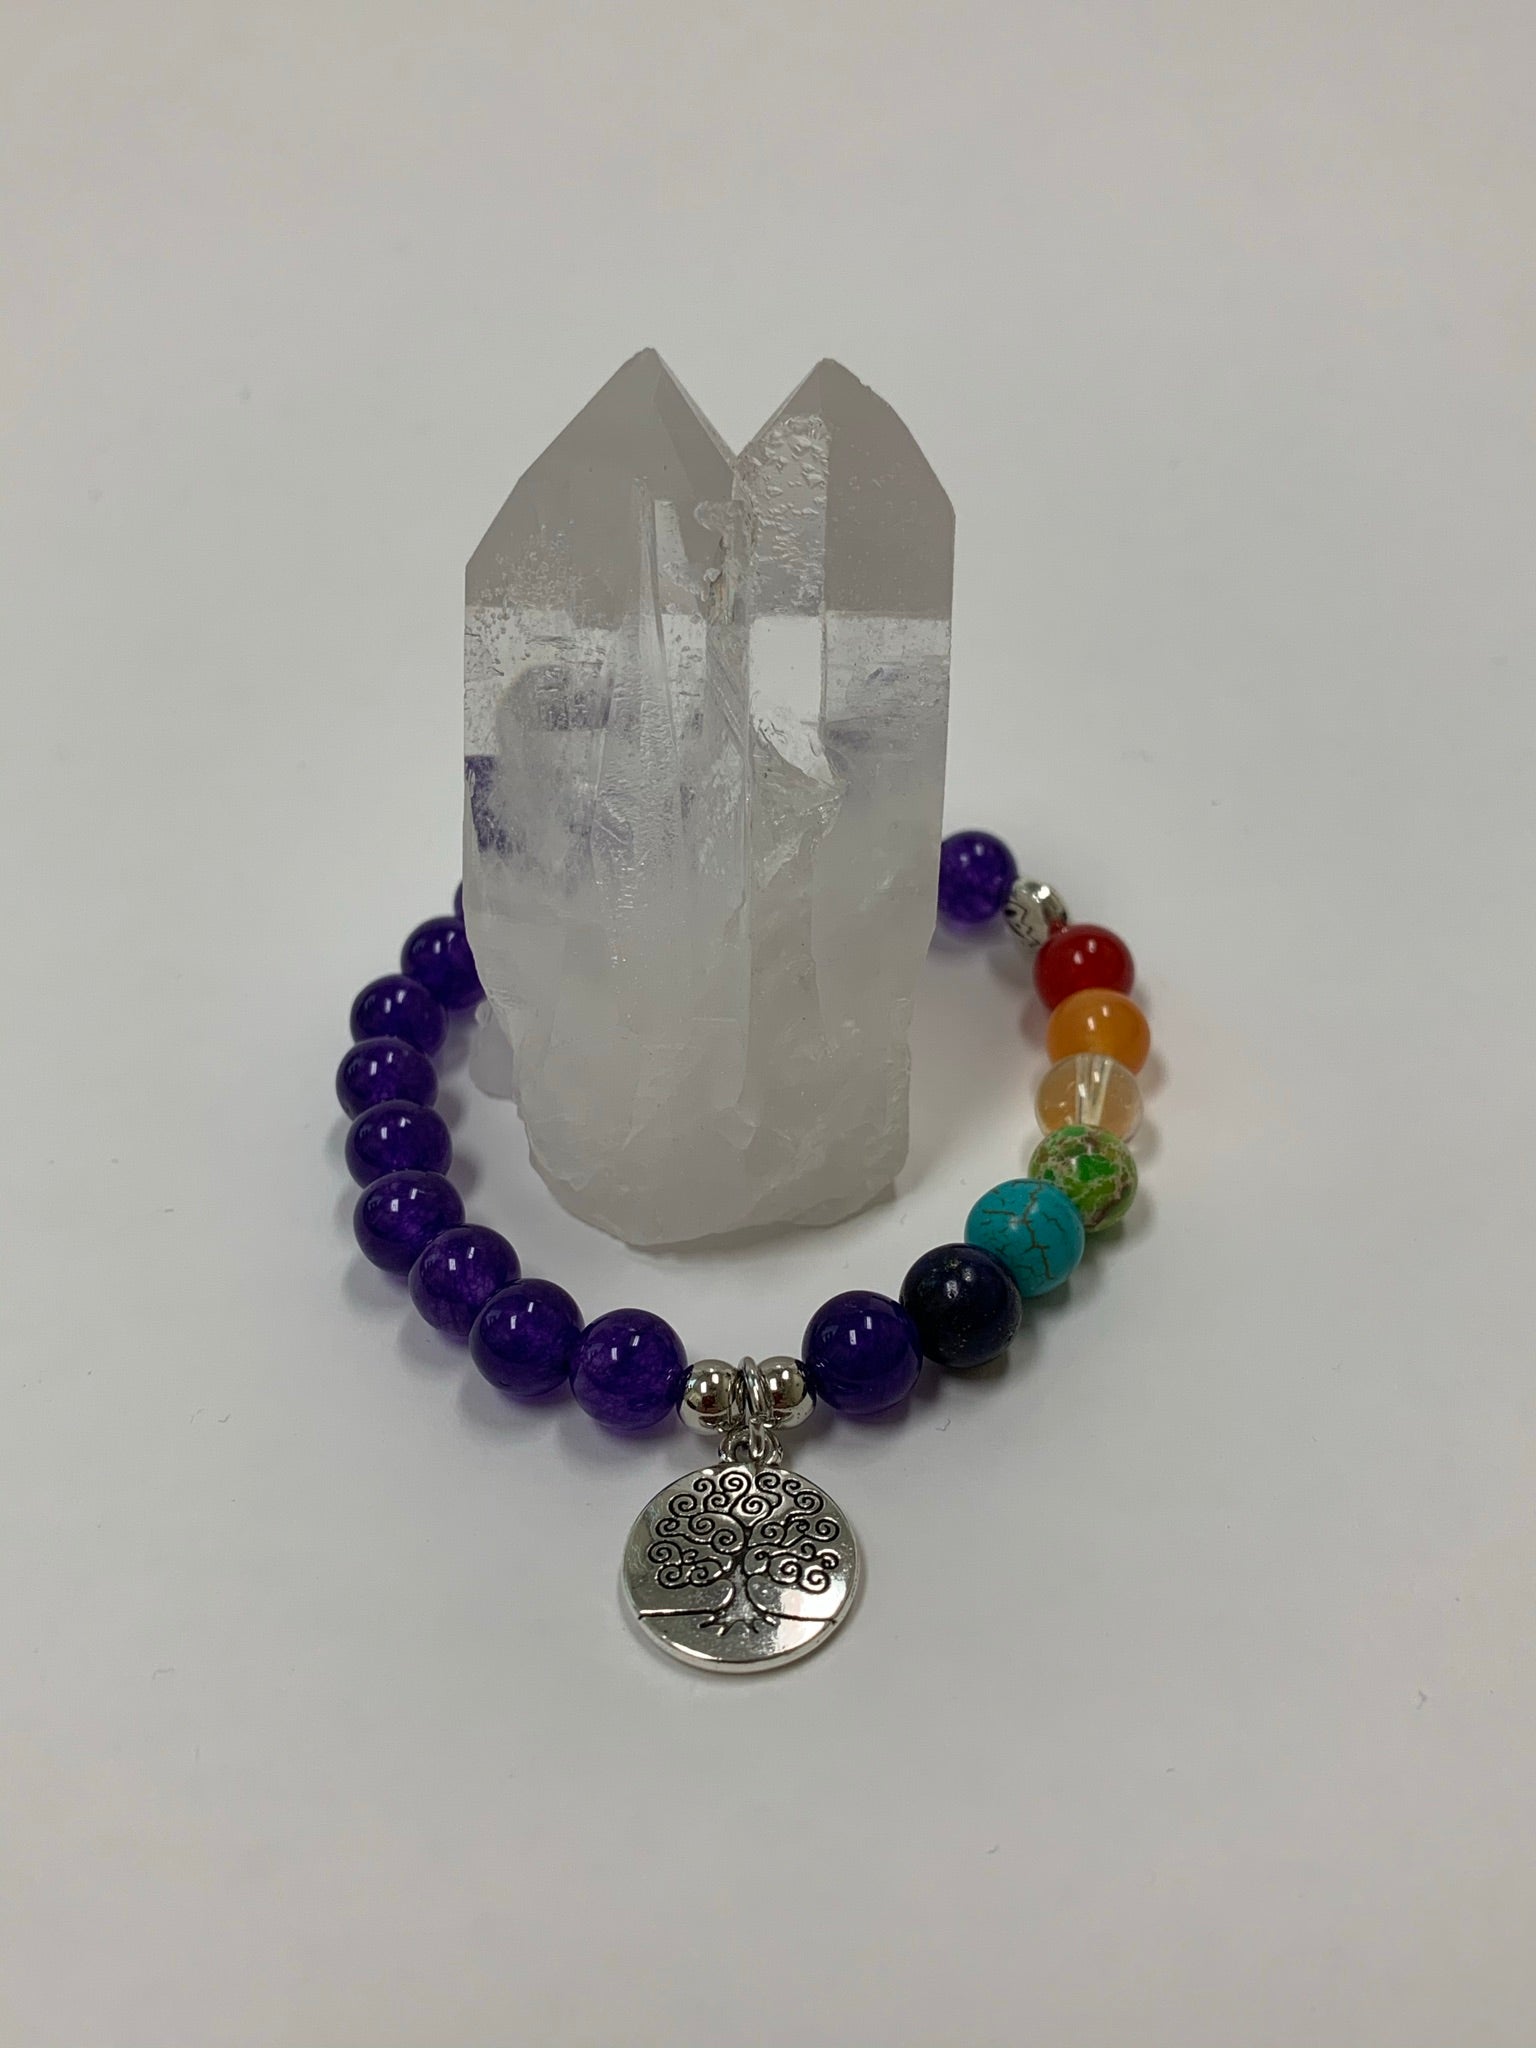 Power bracelet with all amethyst beads except 7 beads to match the chakras. Beads are 8mm. This bracelet also comes with a silver charm that has a tree of life etched in it in black. The beads are genuine but the color has been enhanced.  